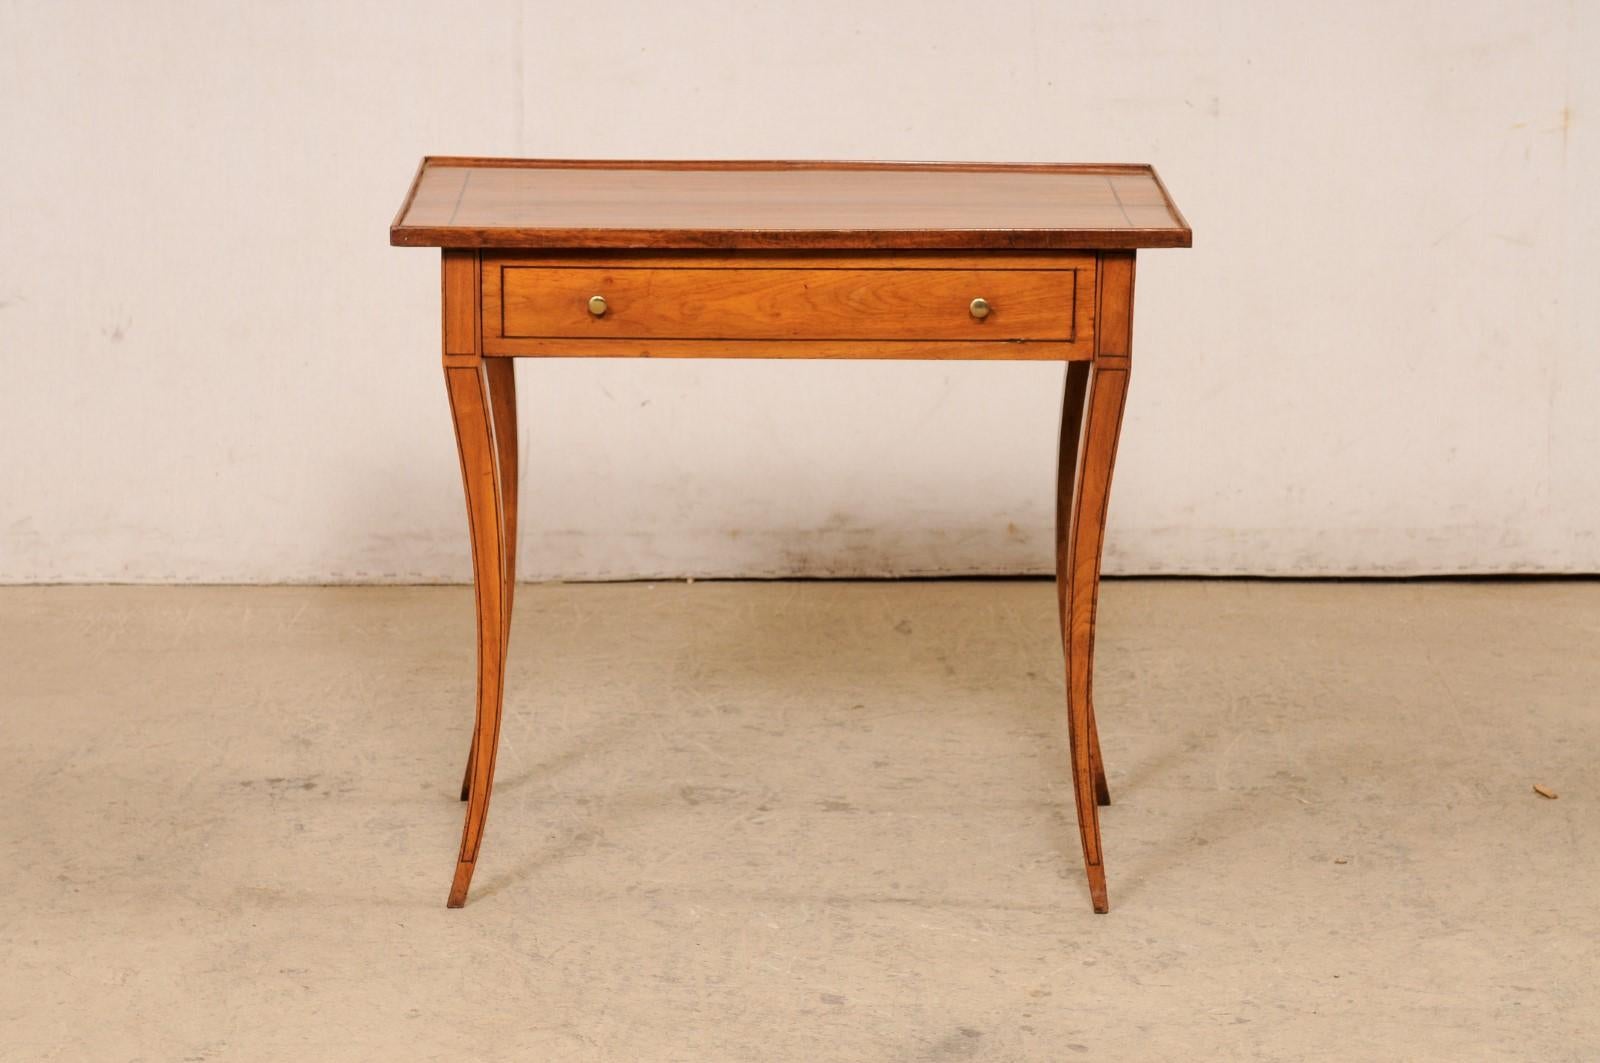 An Early 19th C. Italian Occasional Table w/Inlay Accents & Elegant Sabre Legs For Sale 7